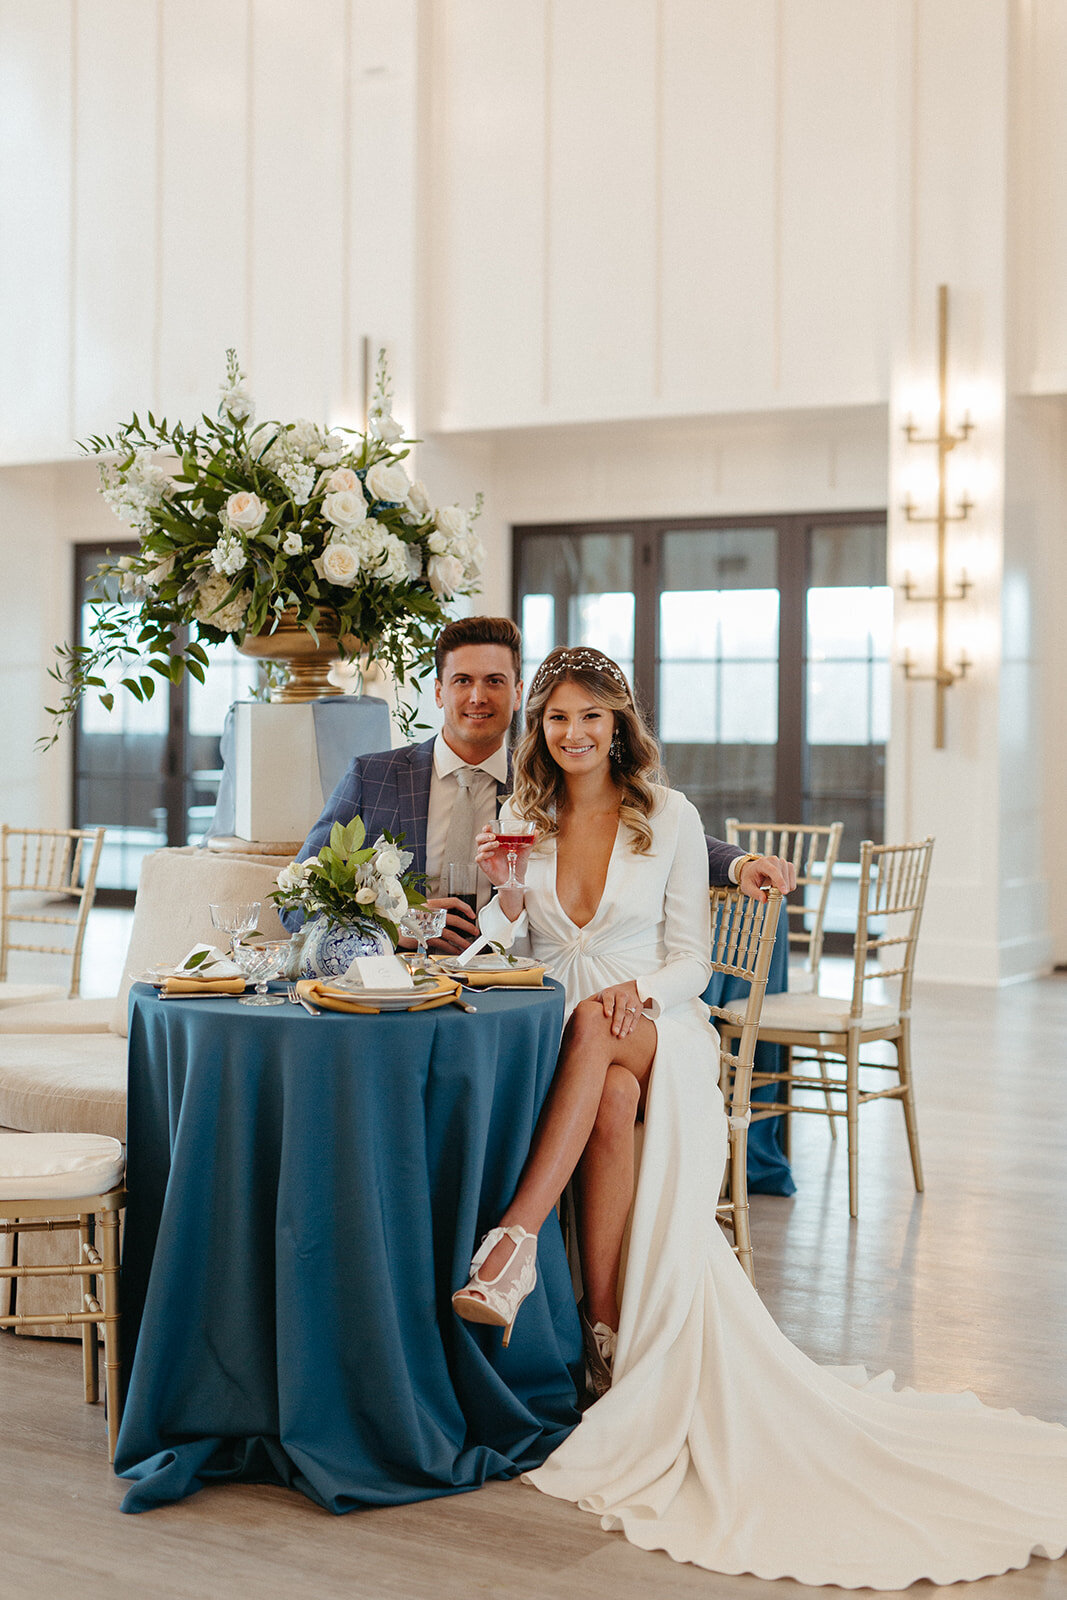 Bride and groom in a blue suit and white wedding gown seated at a banquet table holding a cocktail.